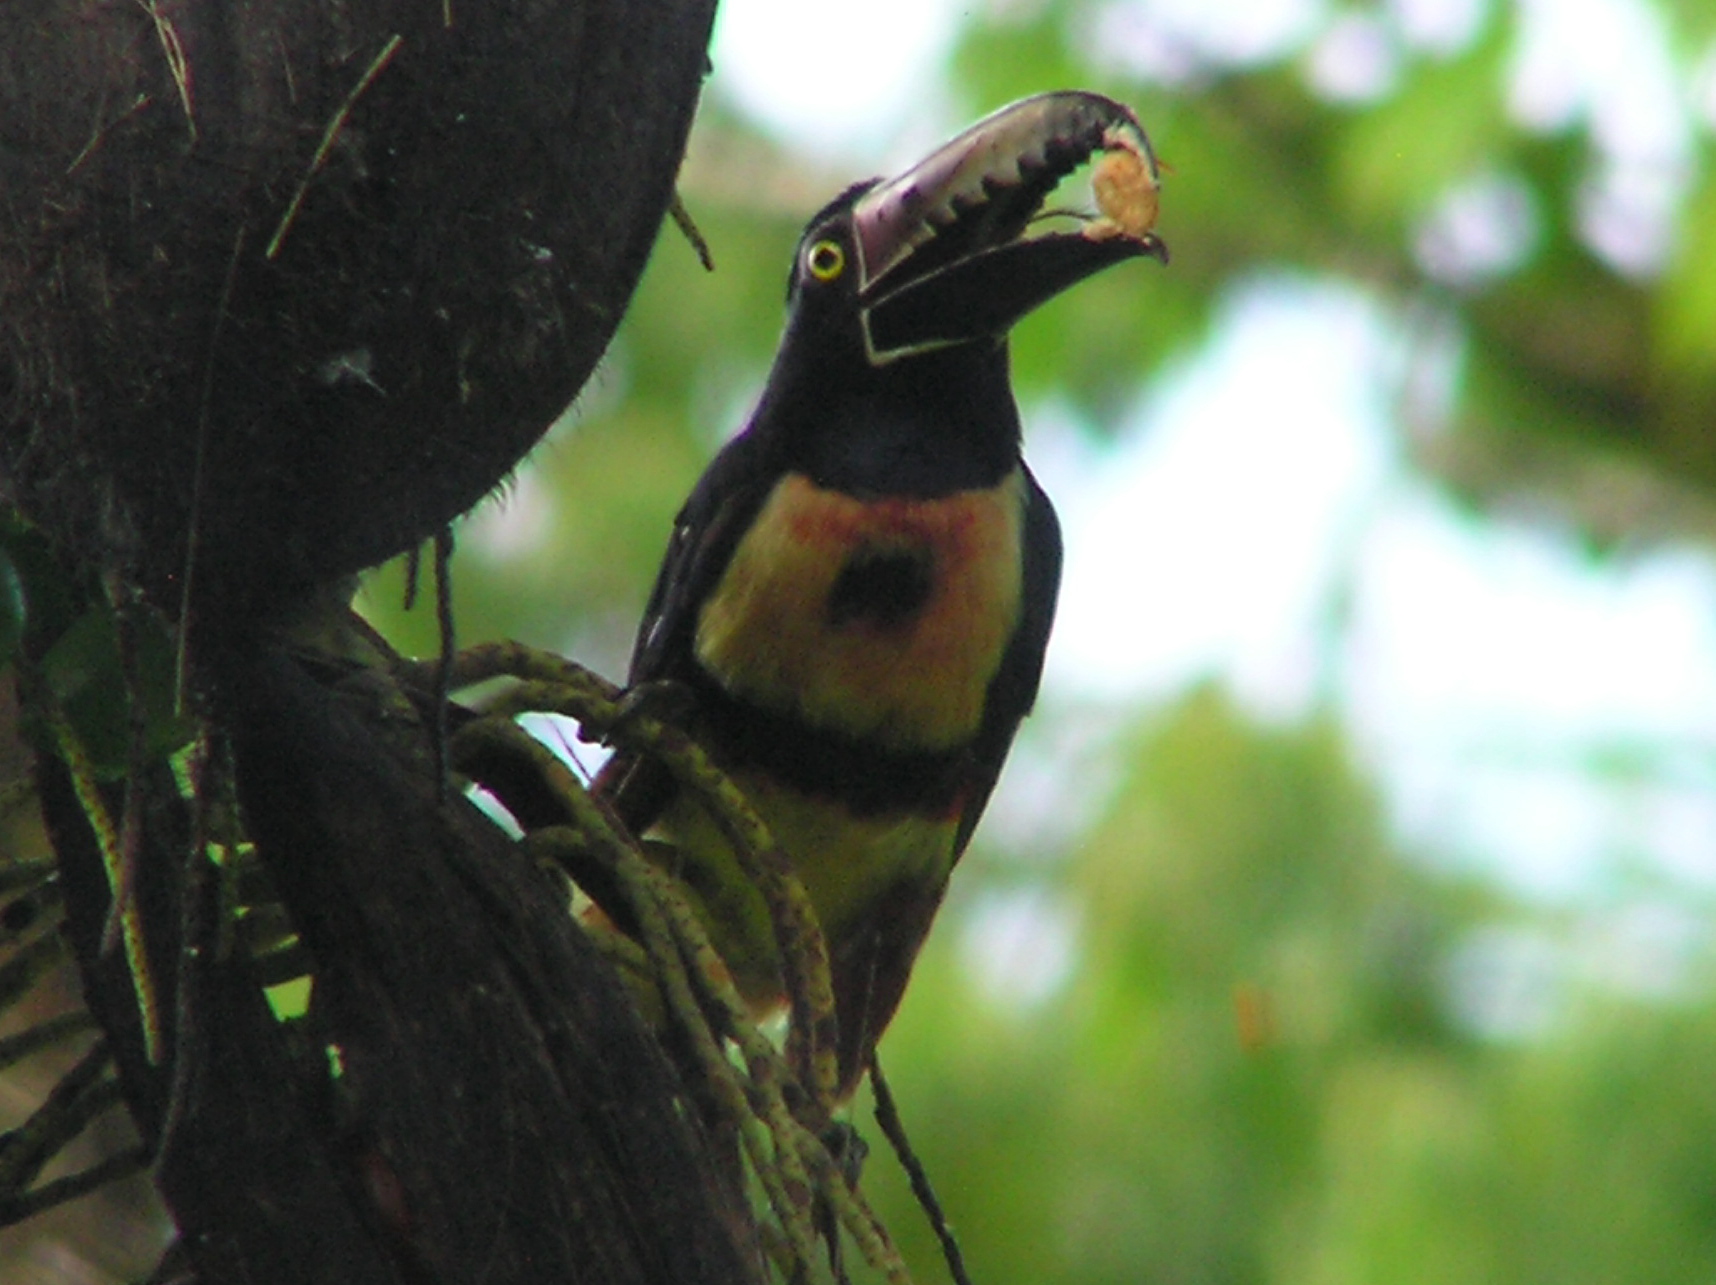 Click picture to see more Collared Aracari photos.